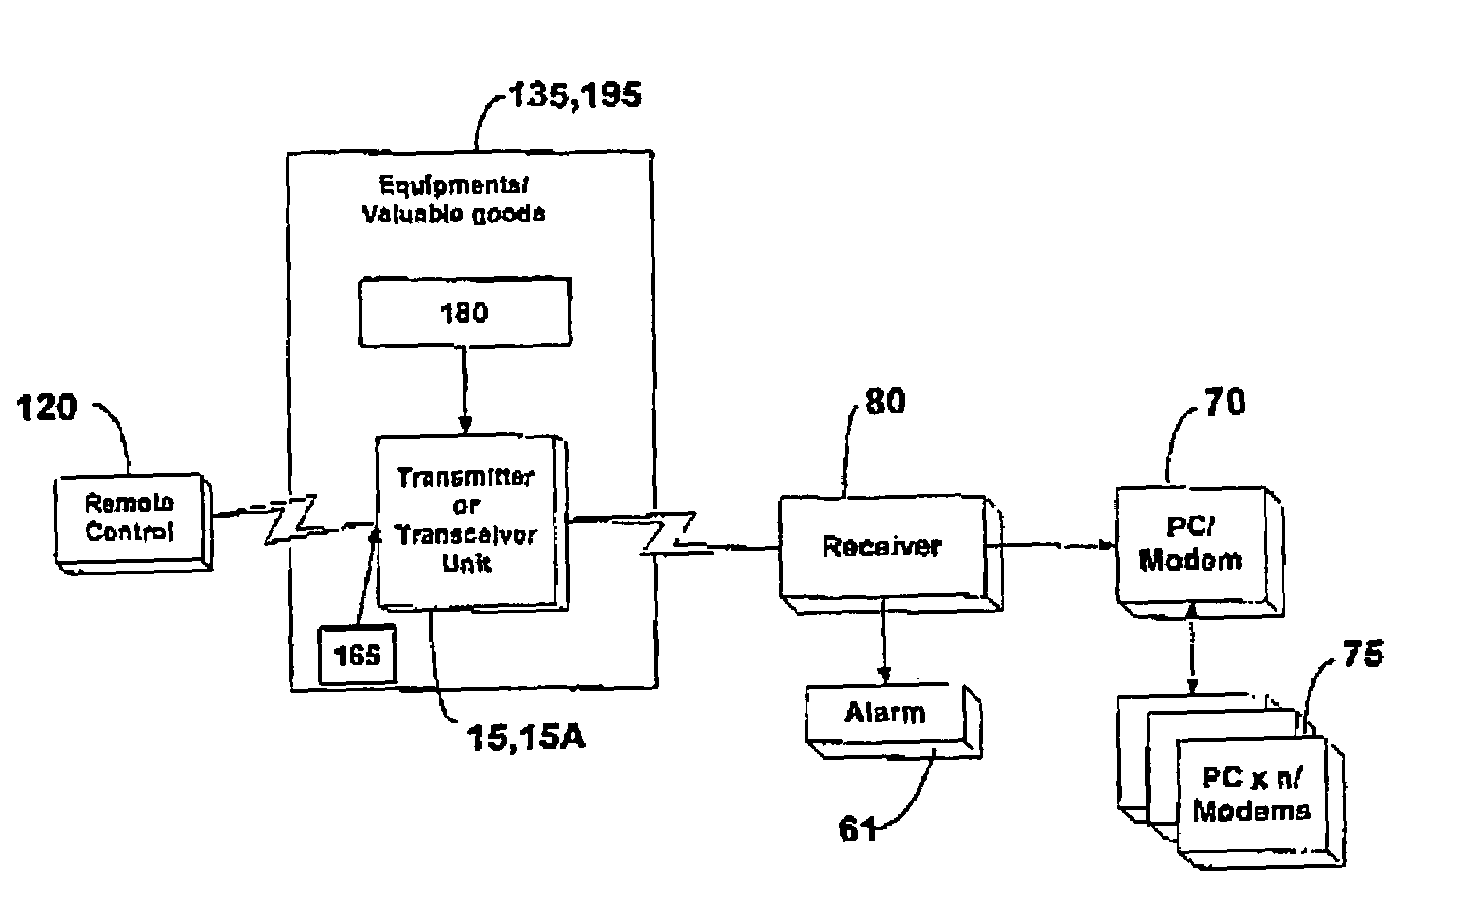 Wireless anti-theft system for computer and other electronic and electrical equipment